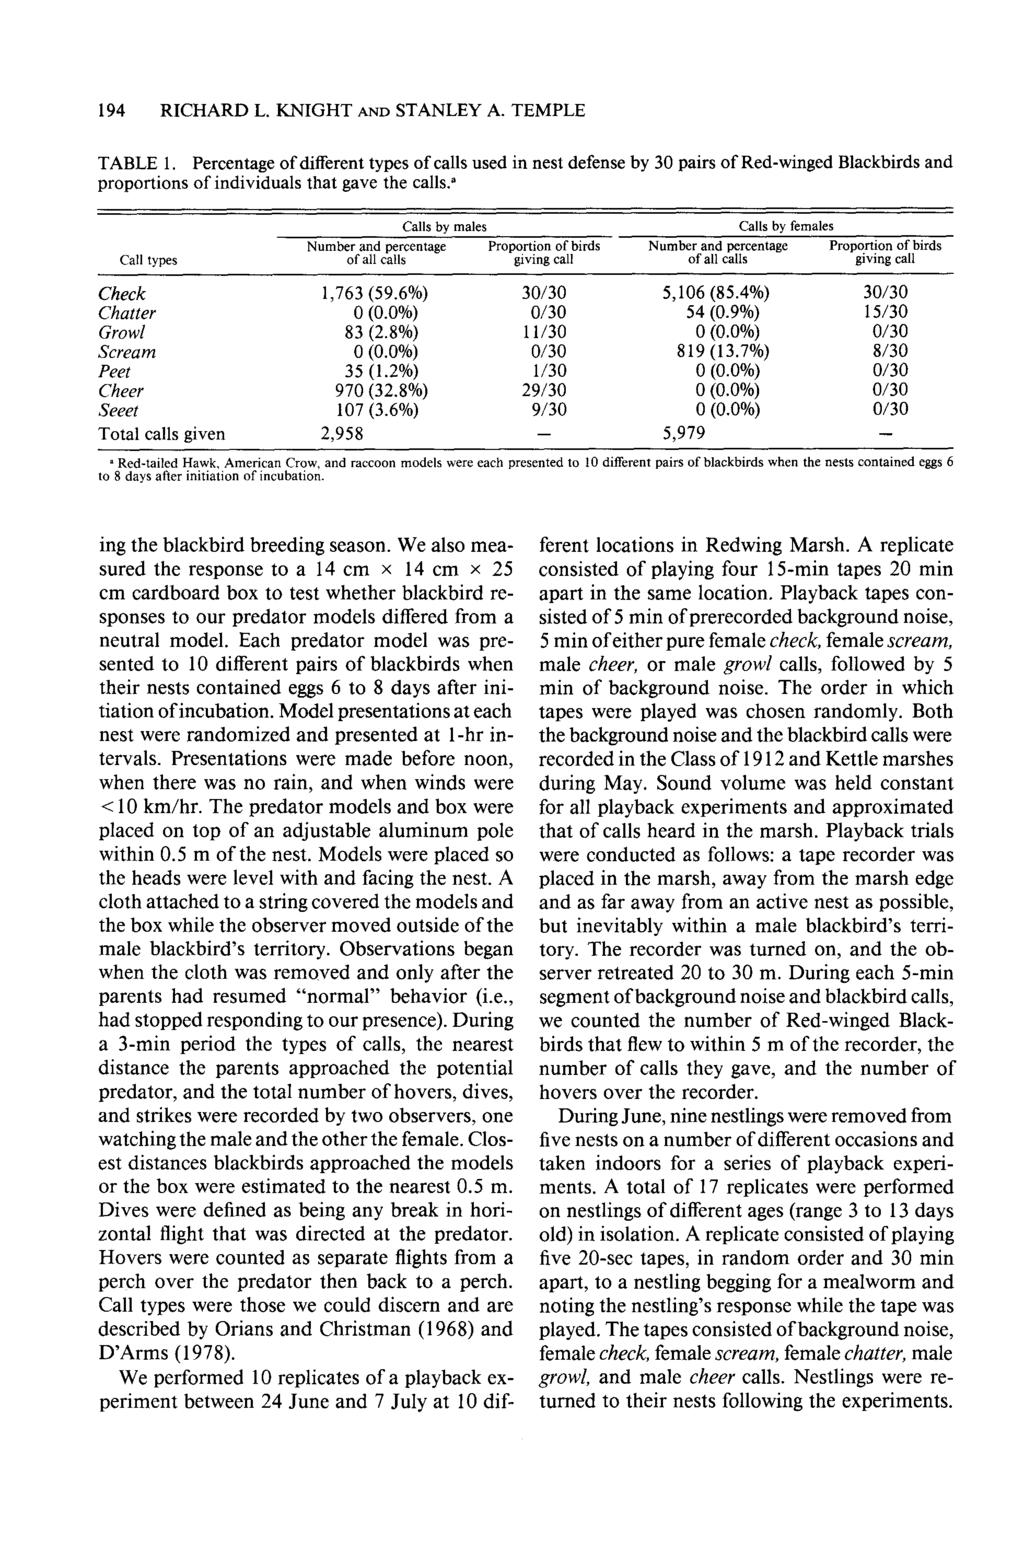 194 RICHARD L. KNIGHT AND STANLEY A. TEMPLE TABLE 1. Percentage of differentypes of calls used in nest defense by 30 pairs of Red-winged Blackbirds and proportions of individuals that gave the calls.